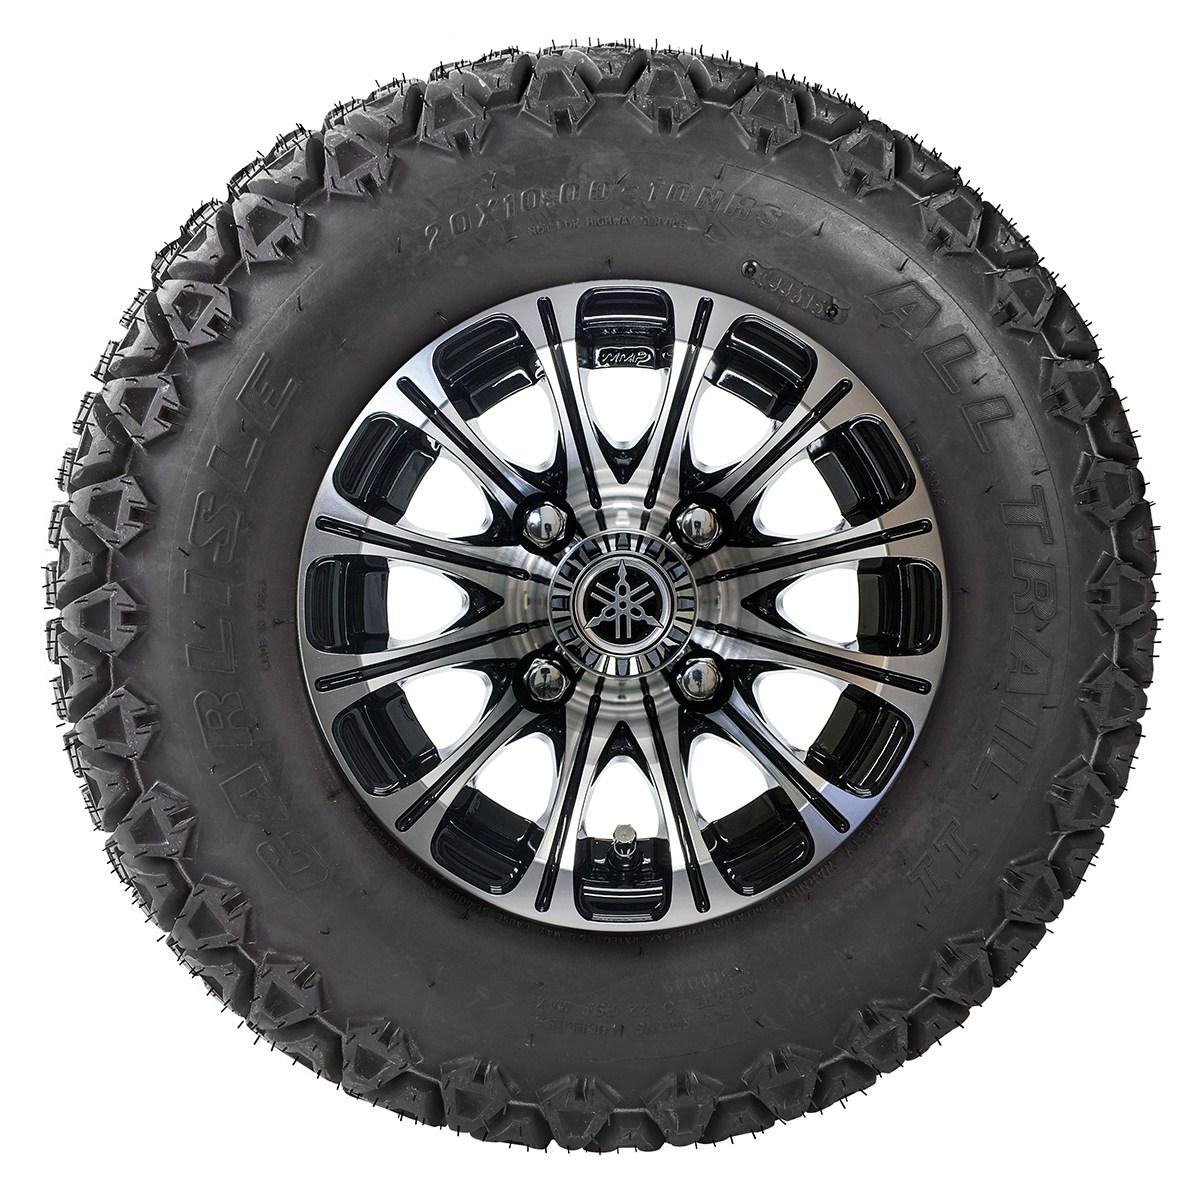 Make going off trail a breeze with this 12-Spoke J-Series All-Terrain Alloy Wheel Assembly that offers increased traction in a ready-to-rumble package.